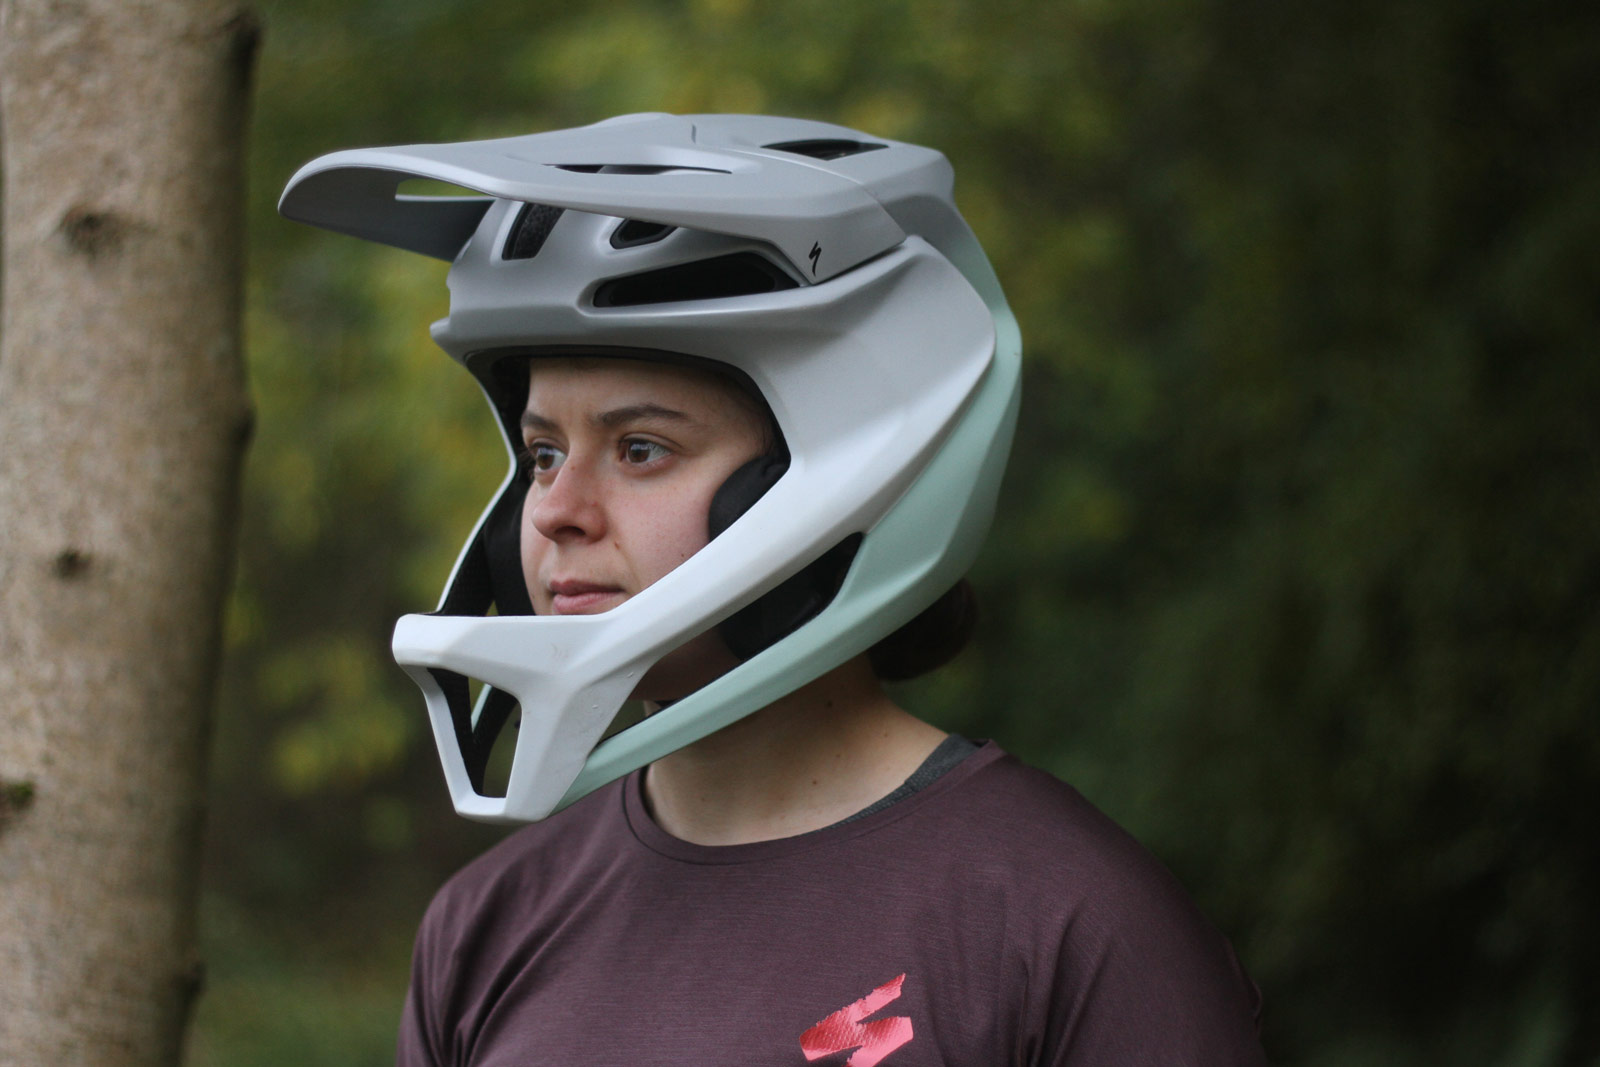 specialized gambit review lightweight full face helmet astm dh certified